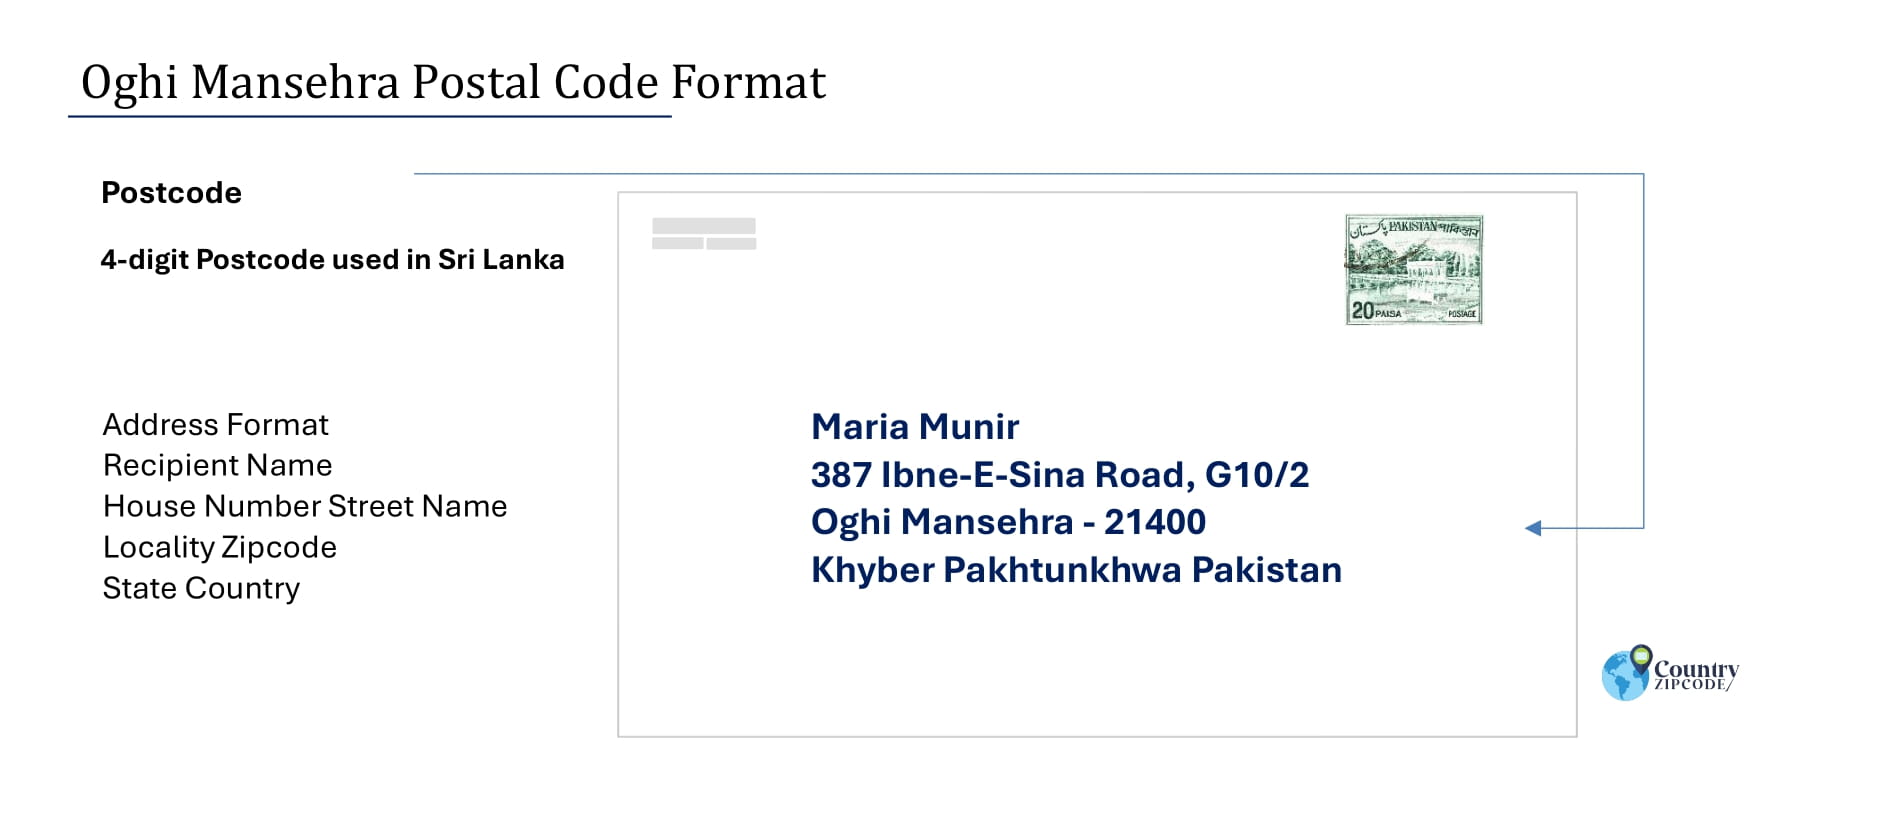 Example of Oghi Mansehra Pakistan Postal code and Address format